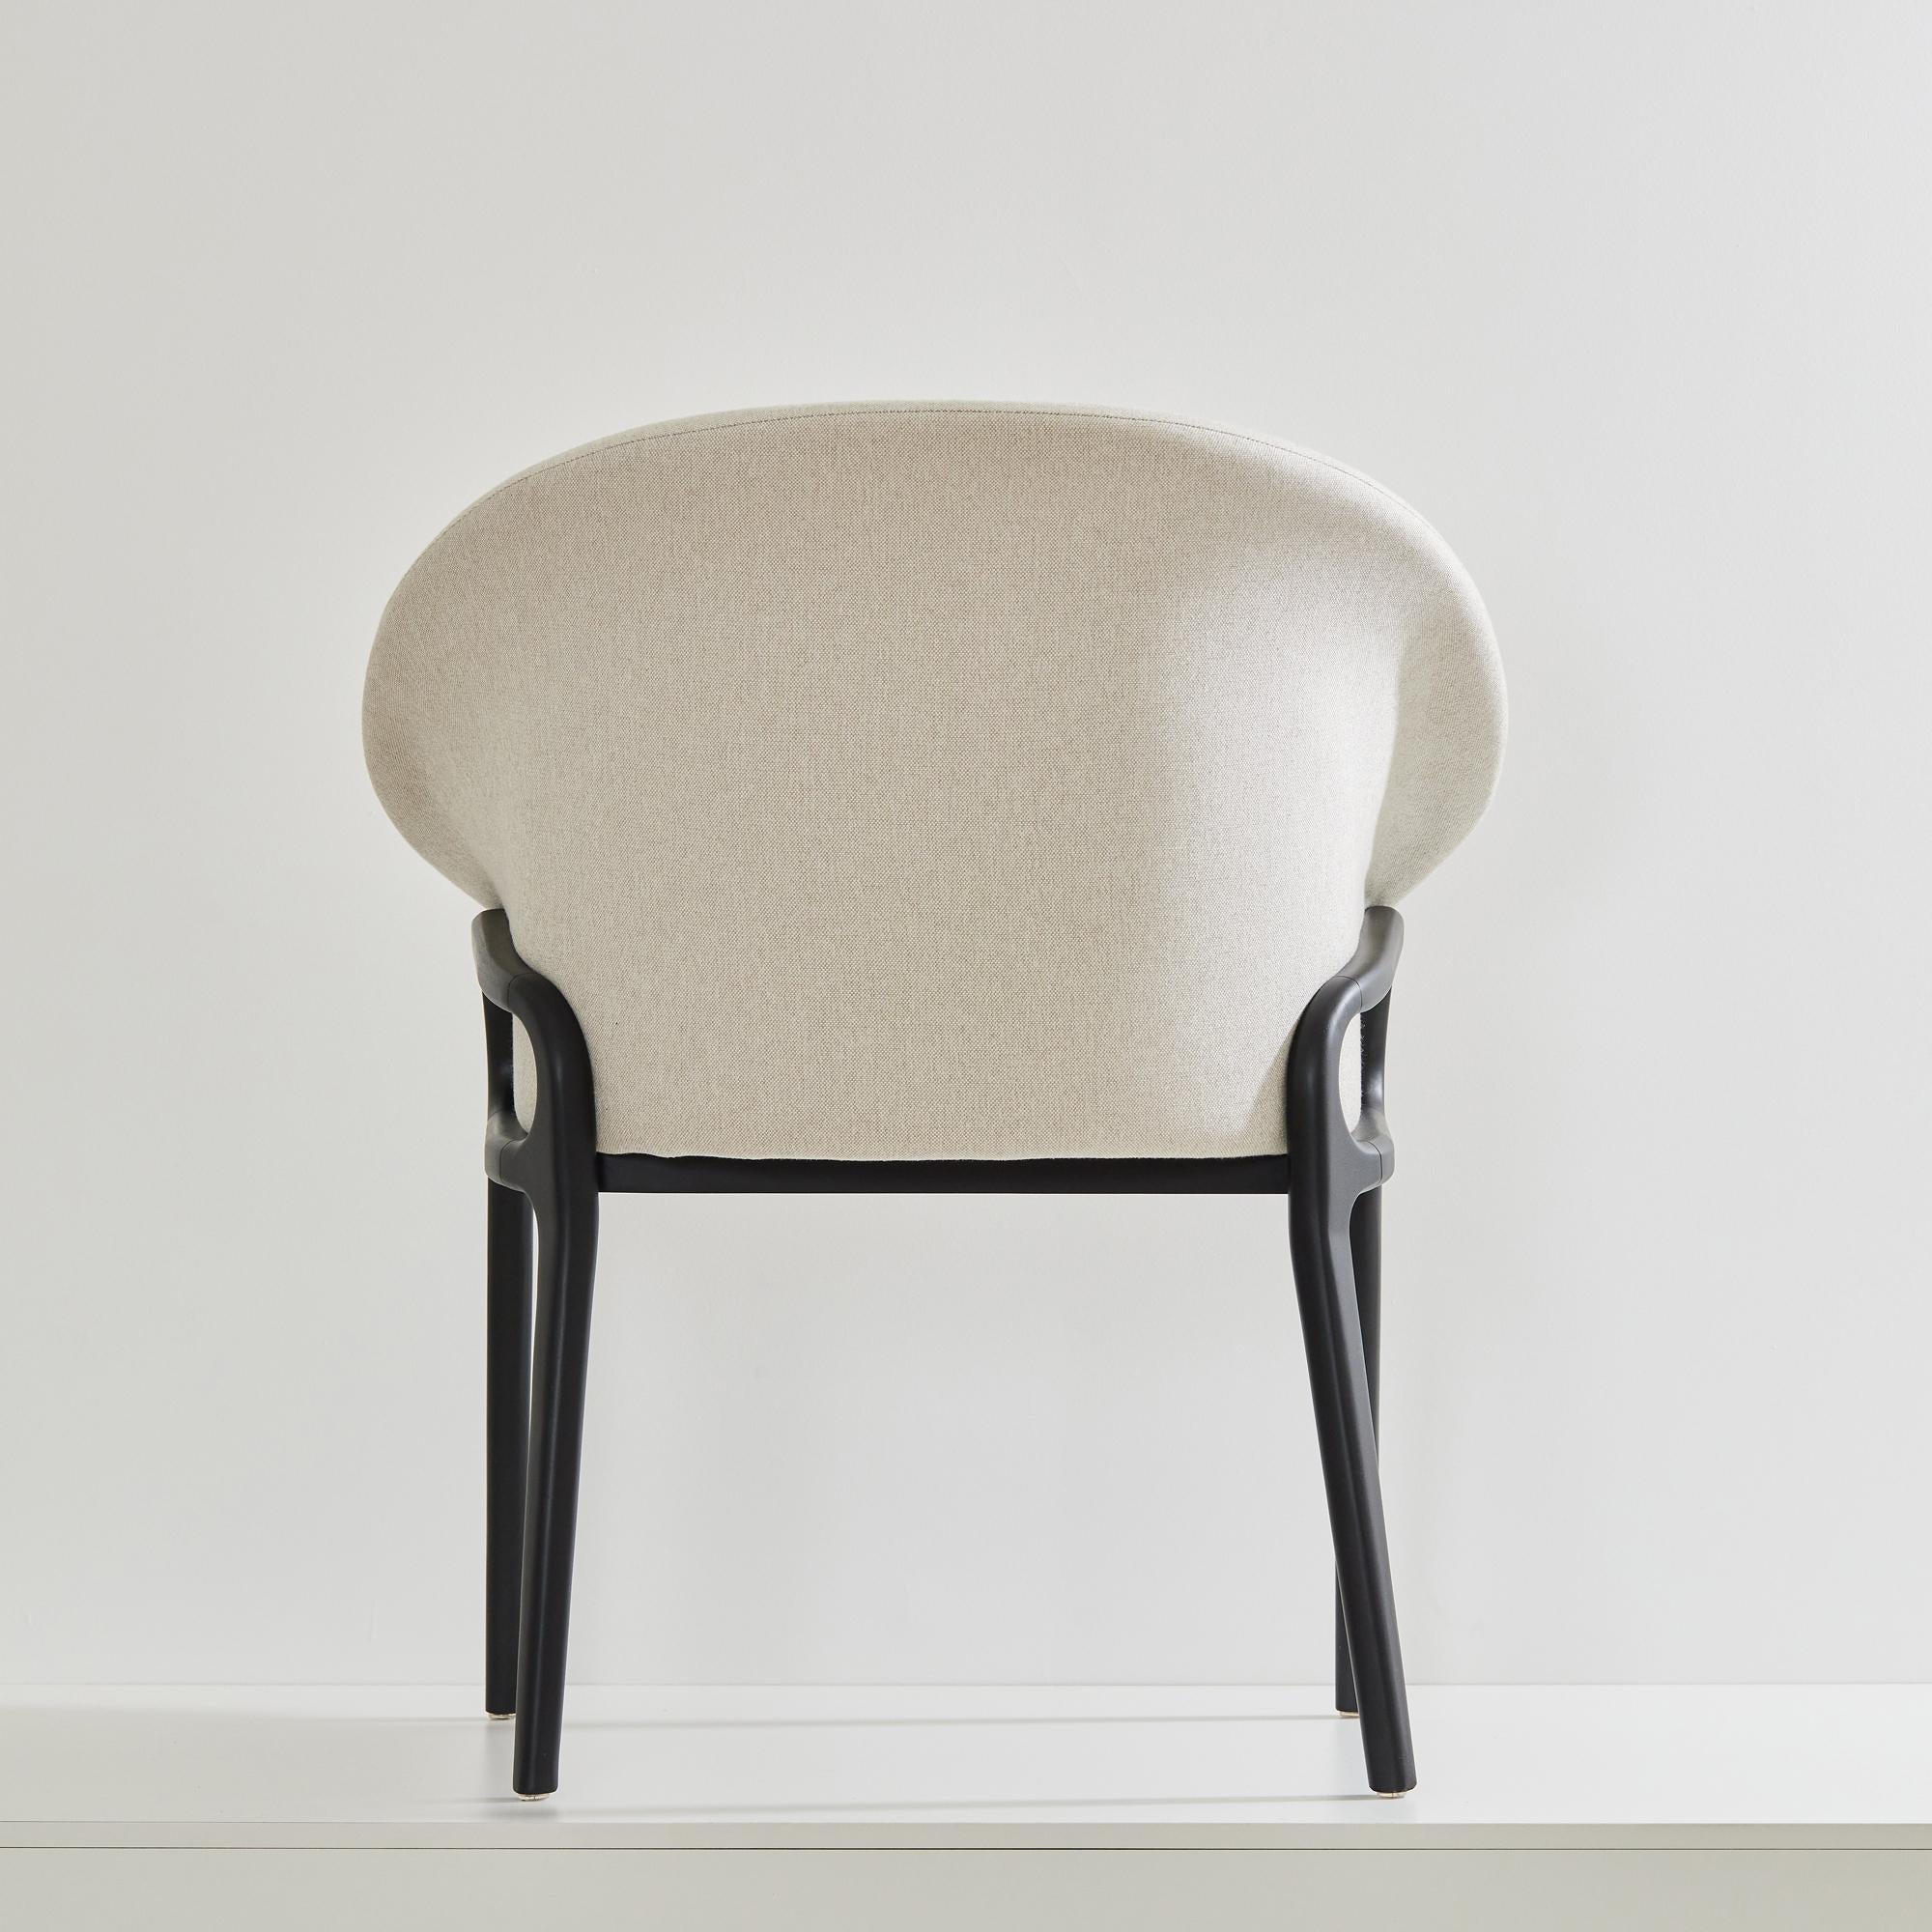 Brazilian Minimalist Organic Chair in black Solid Wood, off-white textiles Seating For Sale